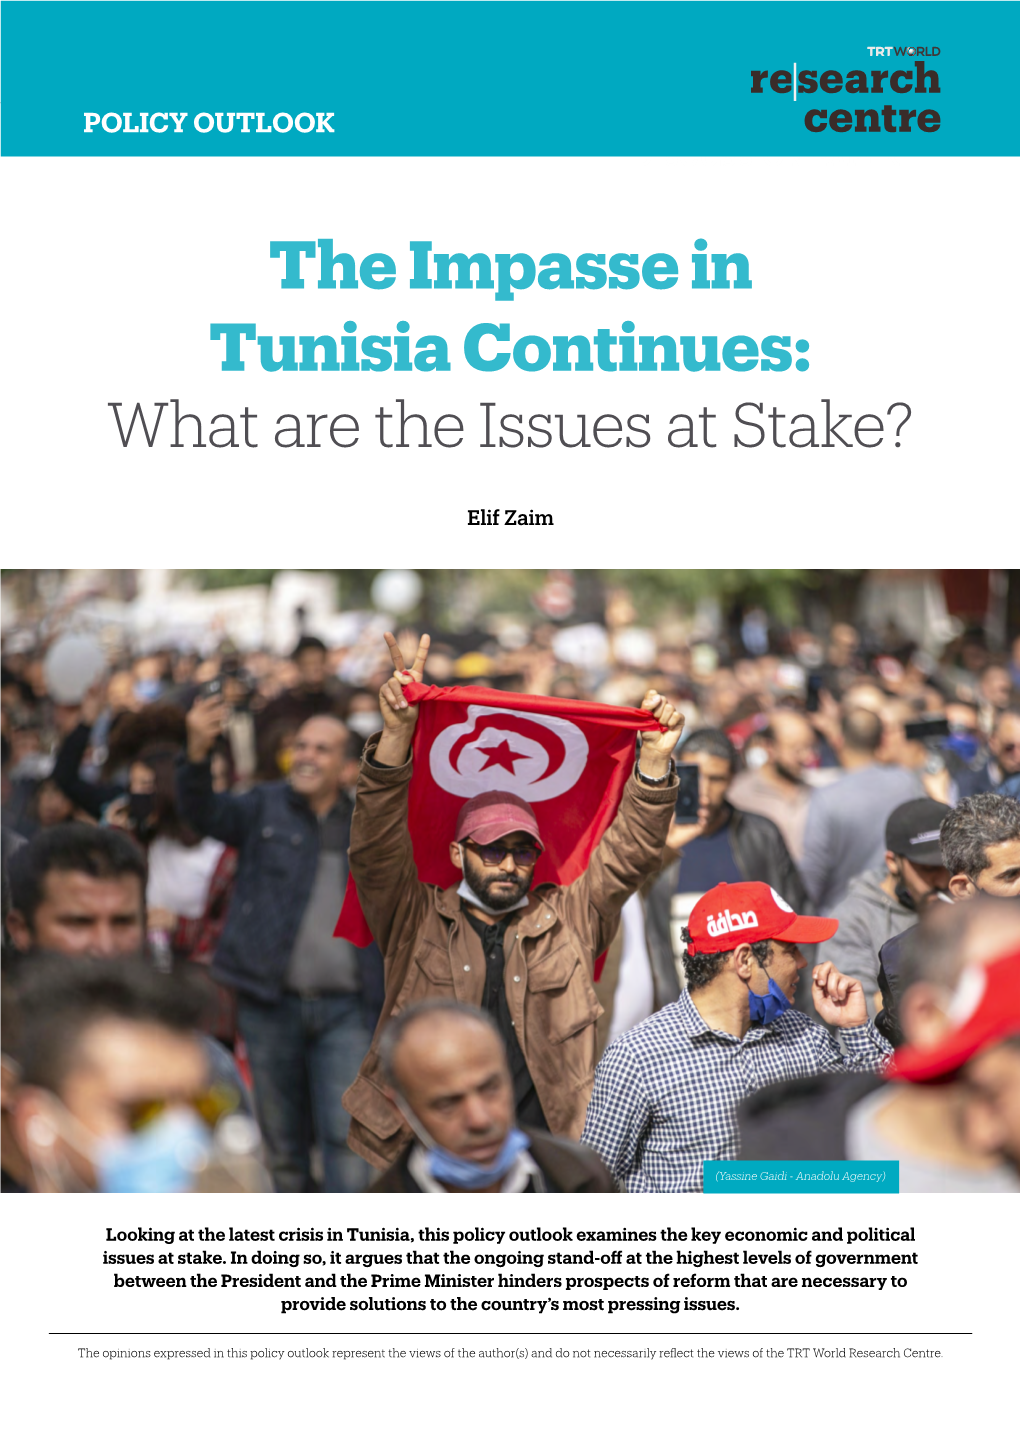 The Impasse in Tunisia Continues: What Are the Issues at Stake?